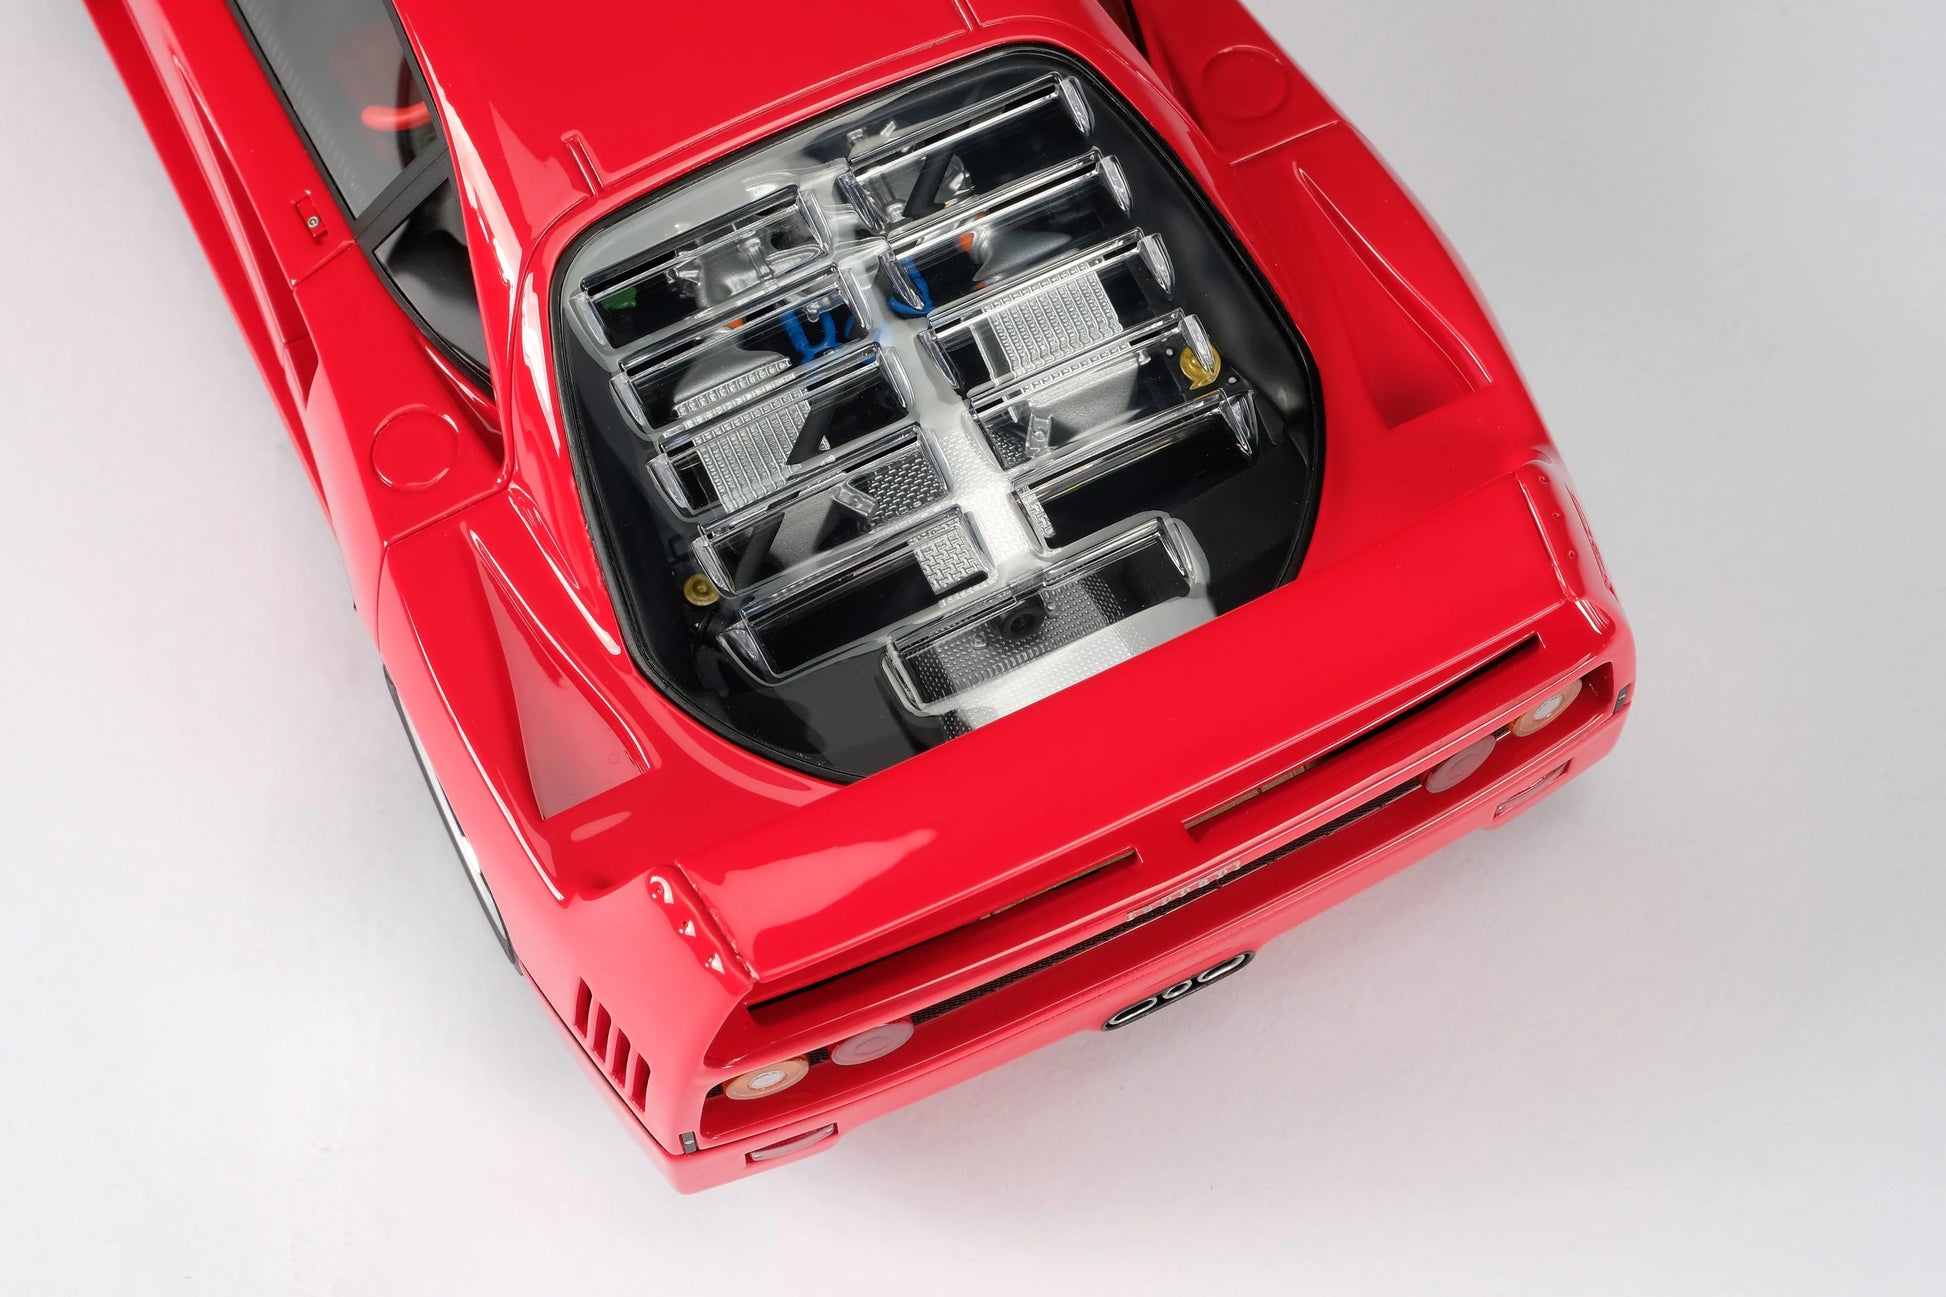 Amalgam Collection Ferrari F40 1:18 Model Car | Exquisite Replica, Highly Detailed Collector's Item | Explore a Range of Luxury Collectibles at 2Jour Concierge, #1 luxury high-end gift & lifestyle shop